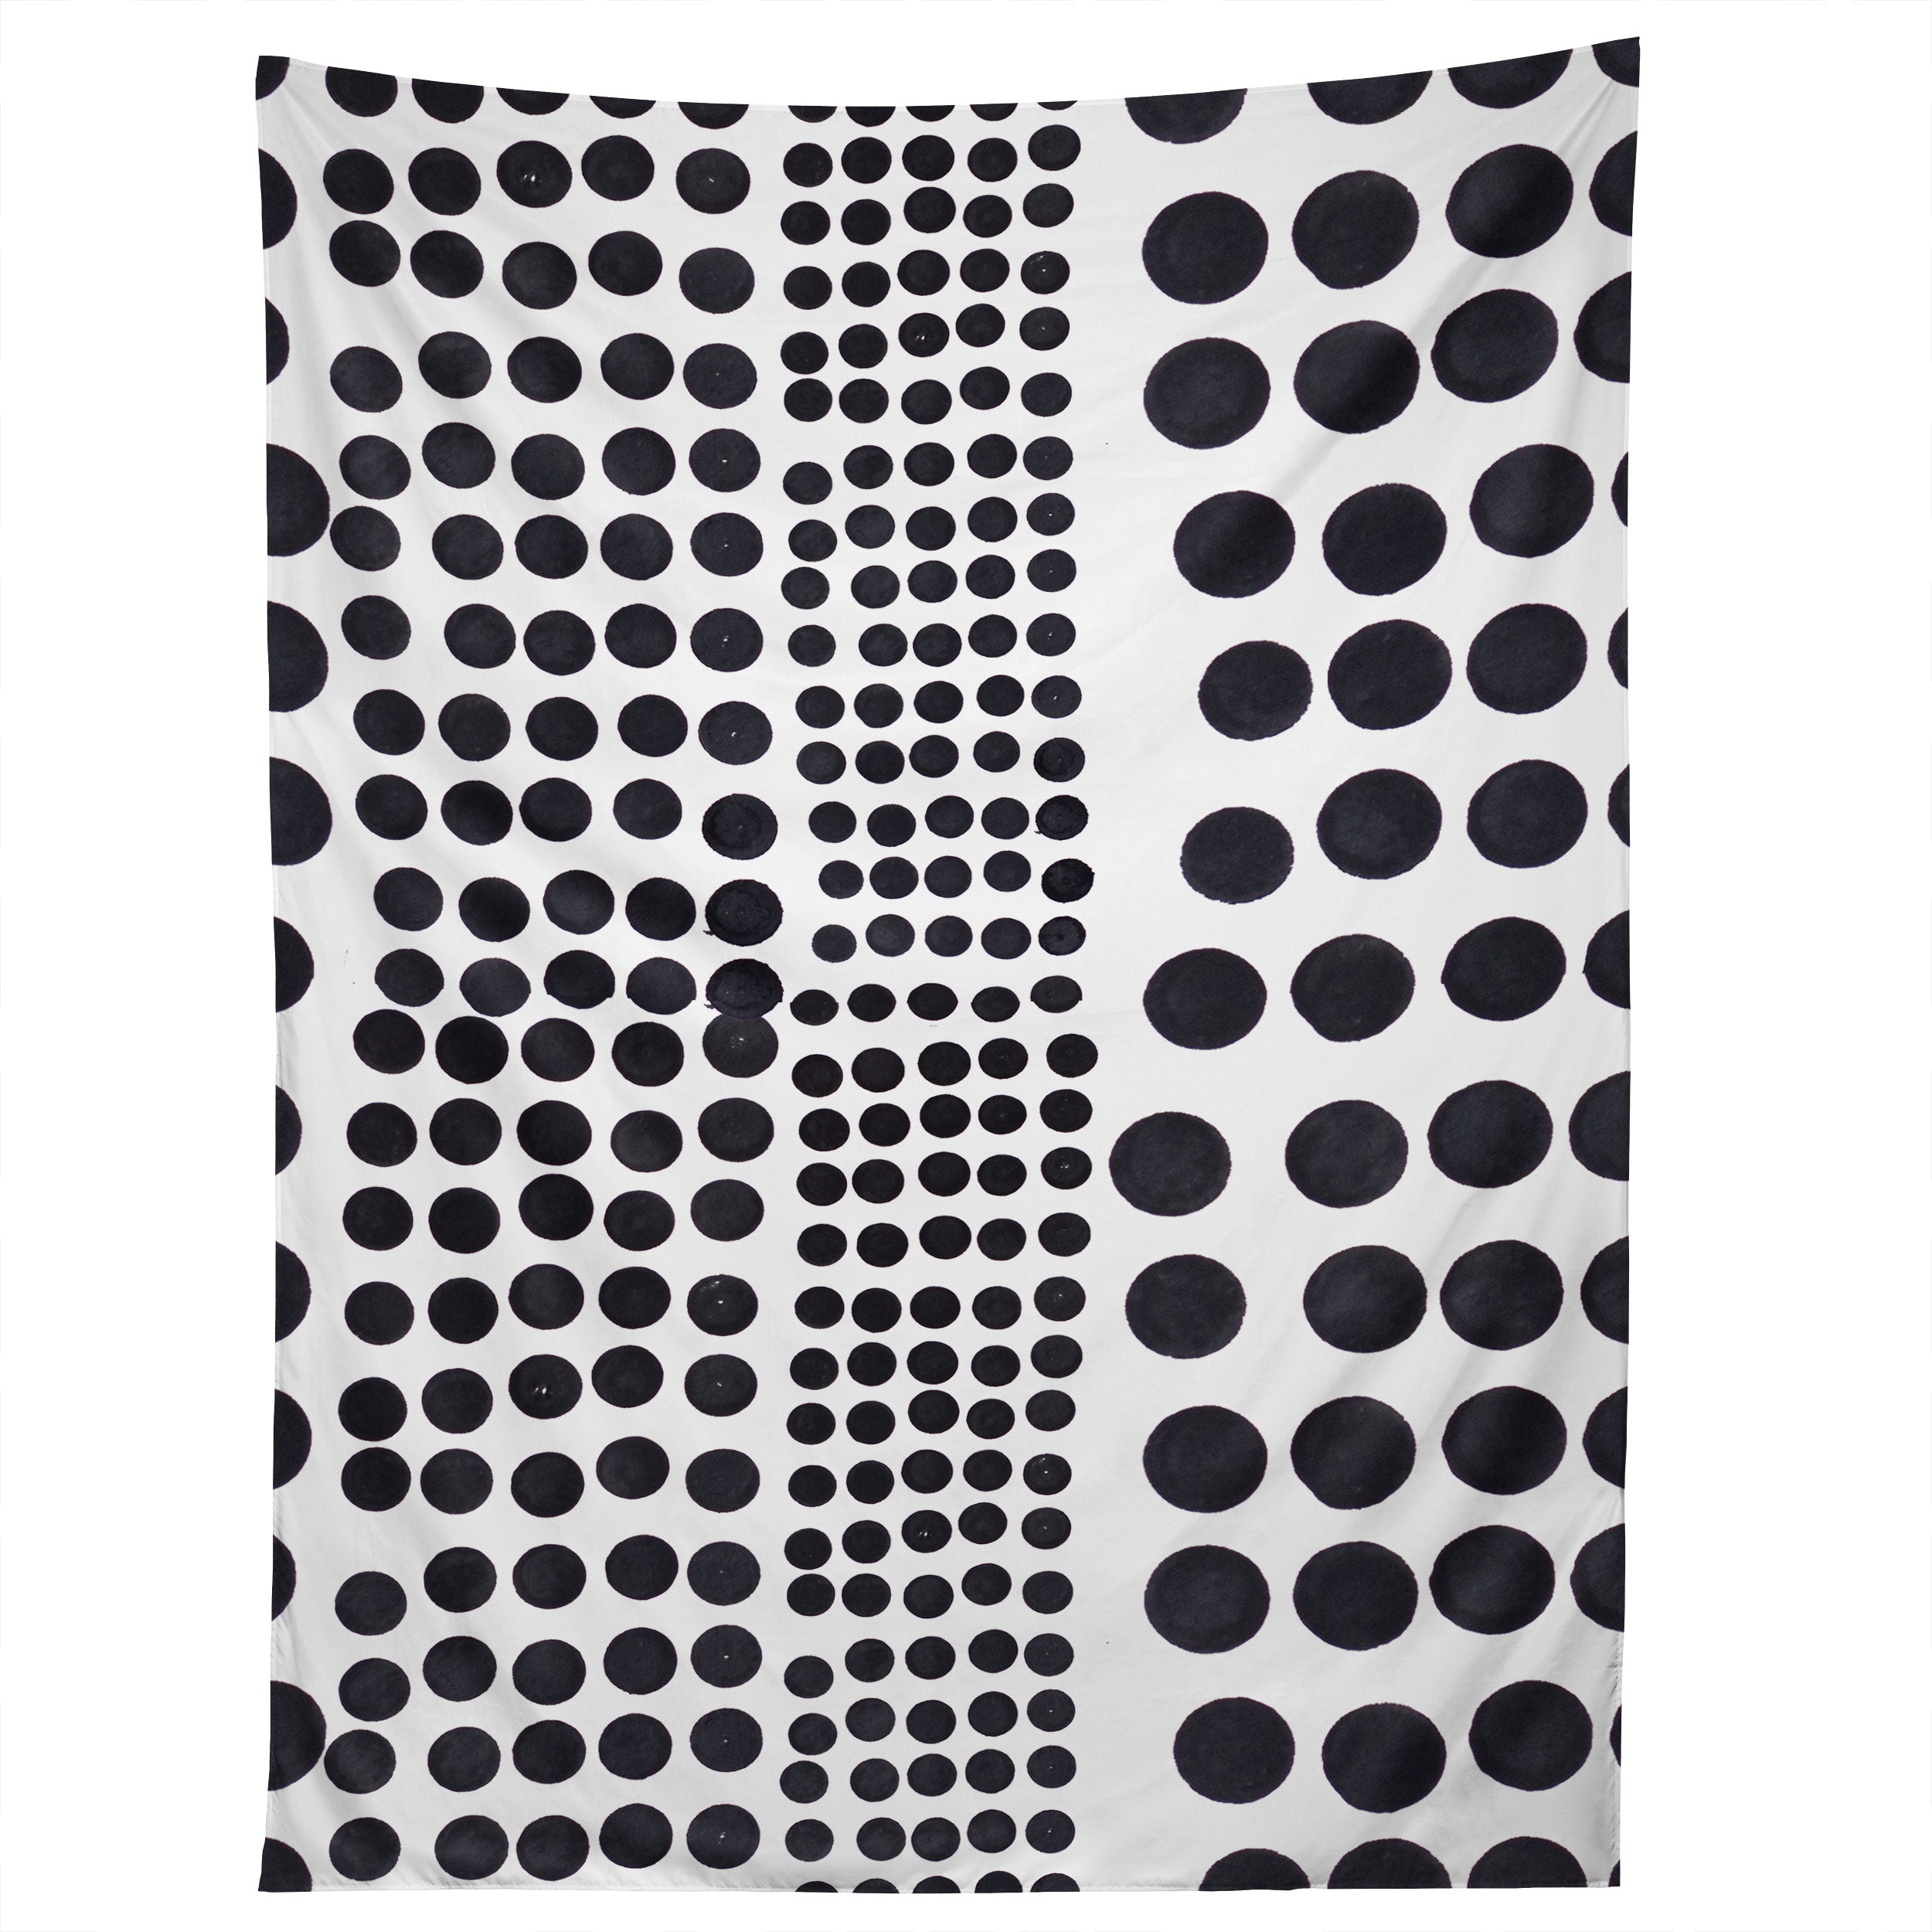 "dots of difference" tapestry